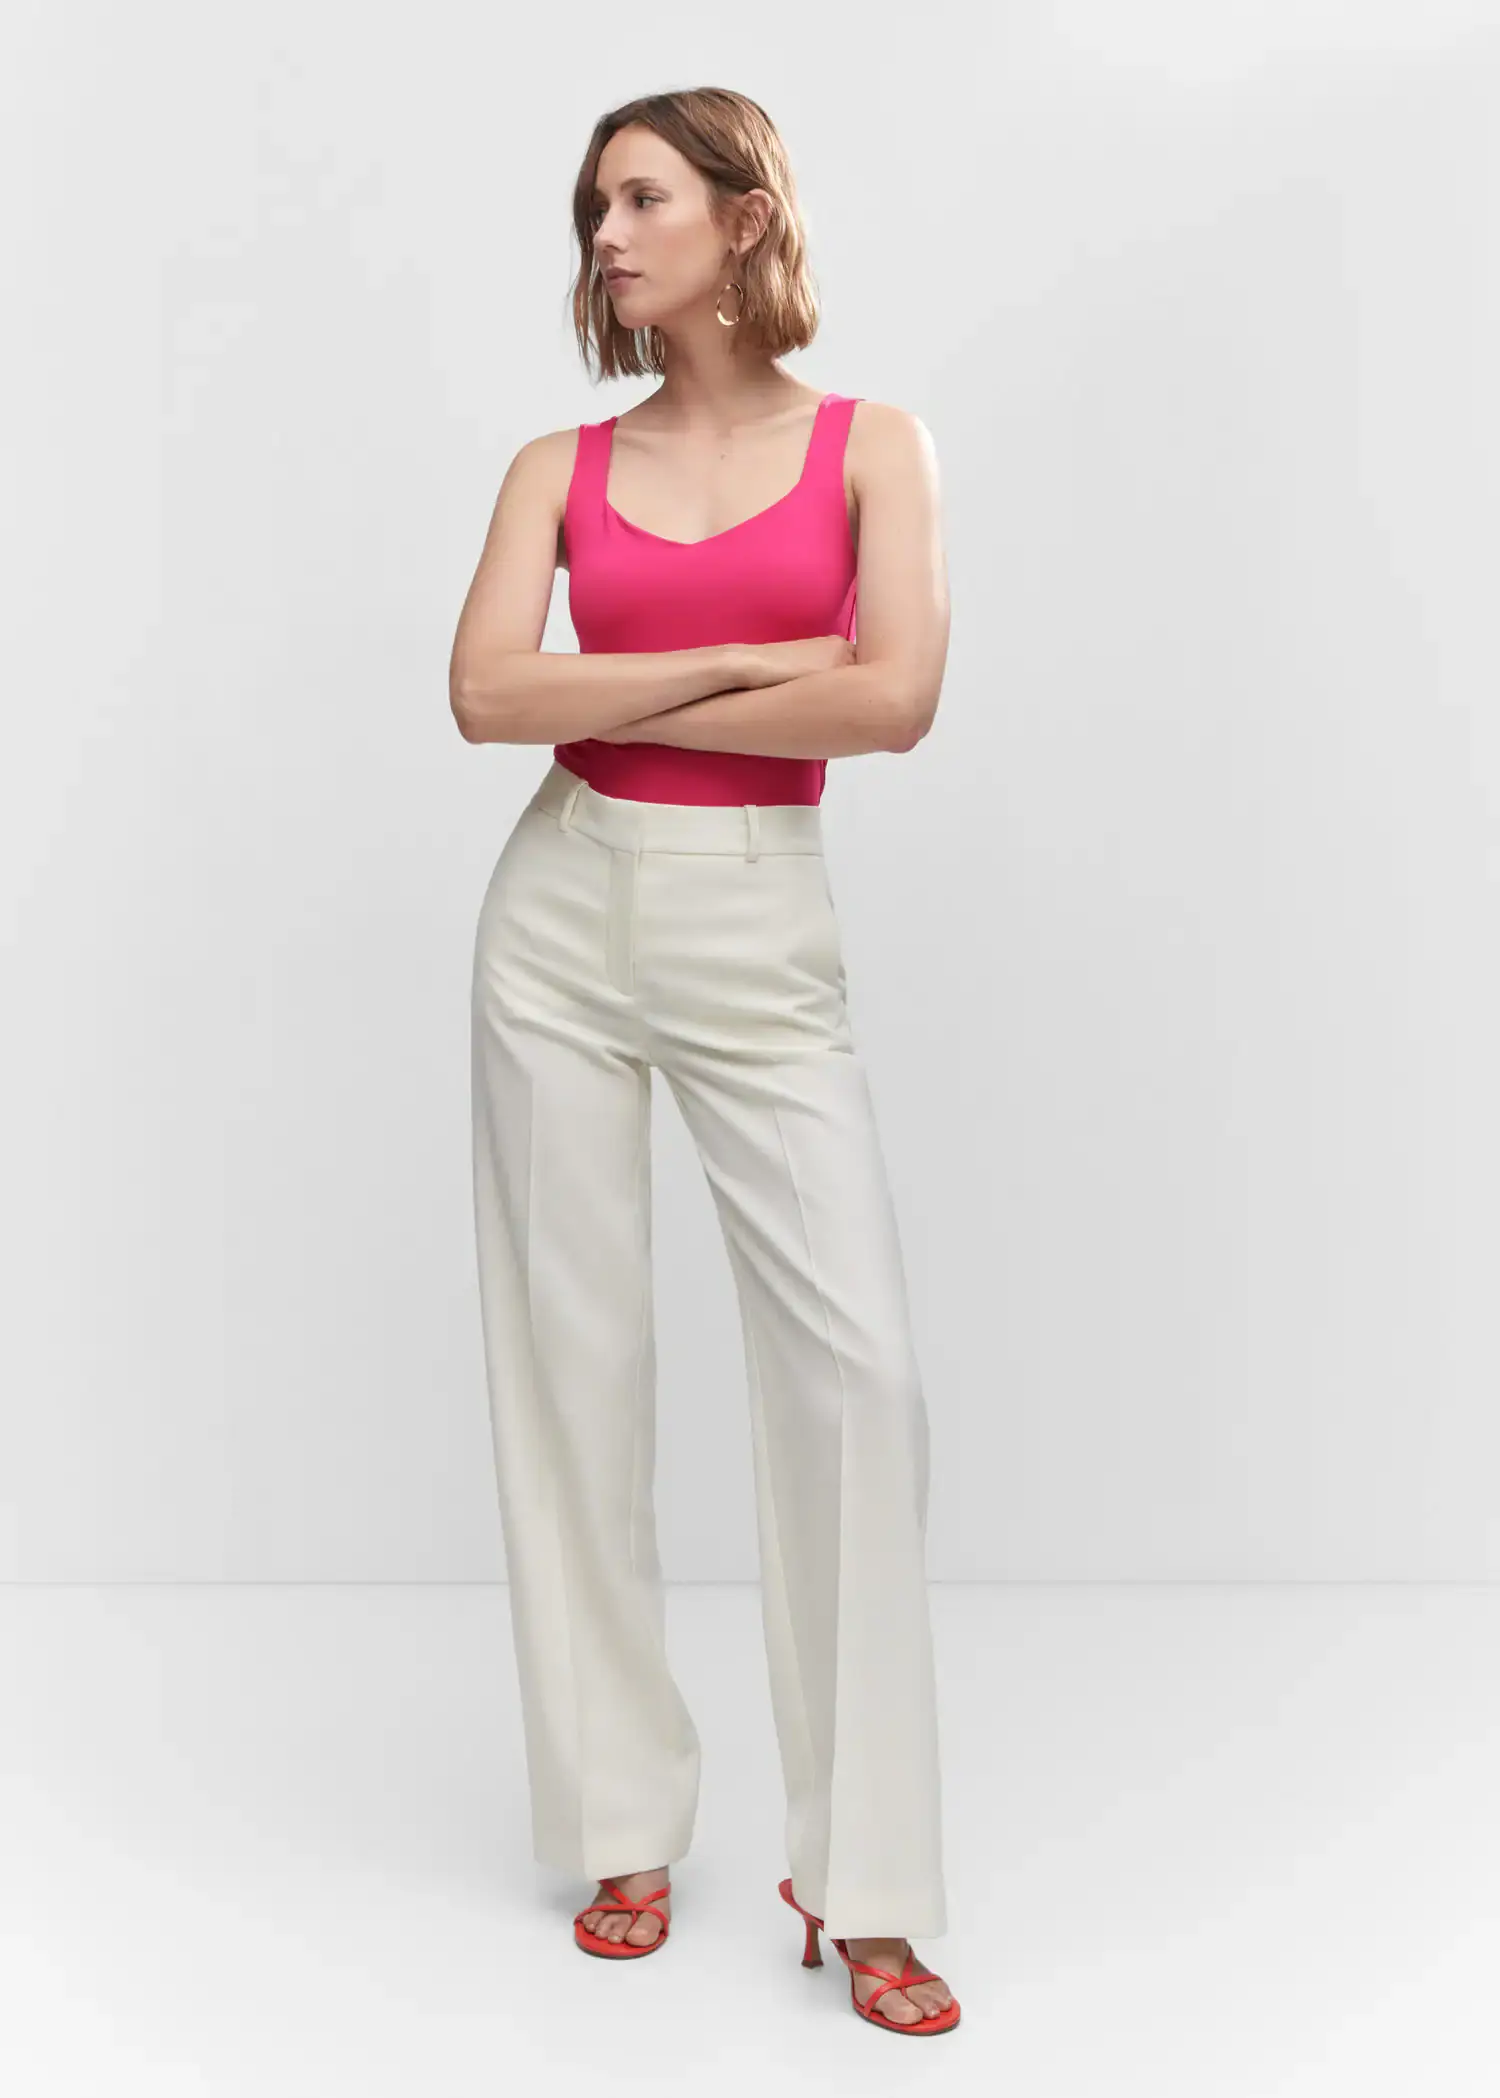 Mango Open elastic top. a woman in a pink top and white pants. 